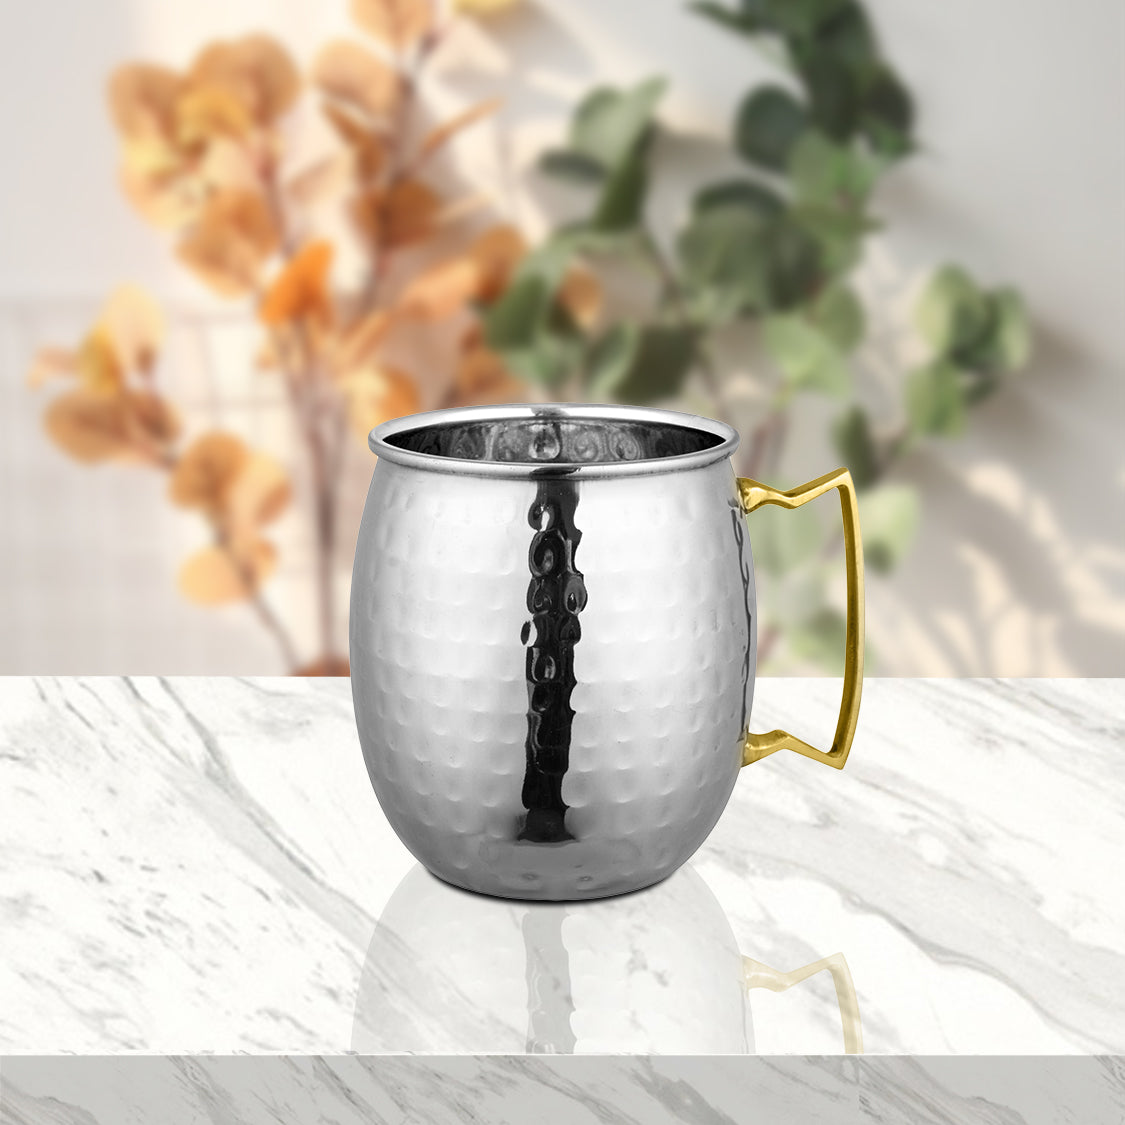 What is a Stainless Steel Hammered Mug used for?